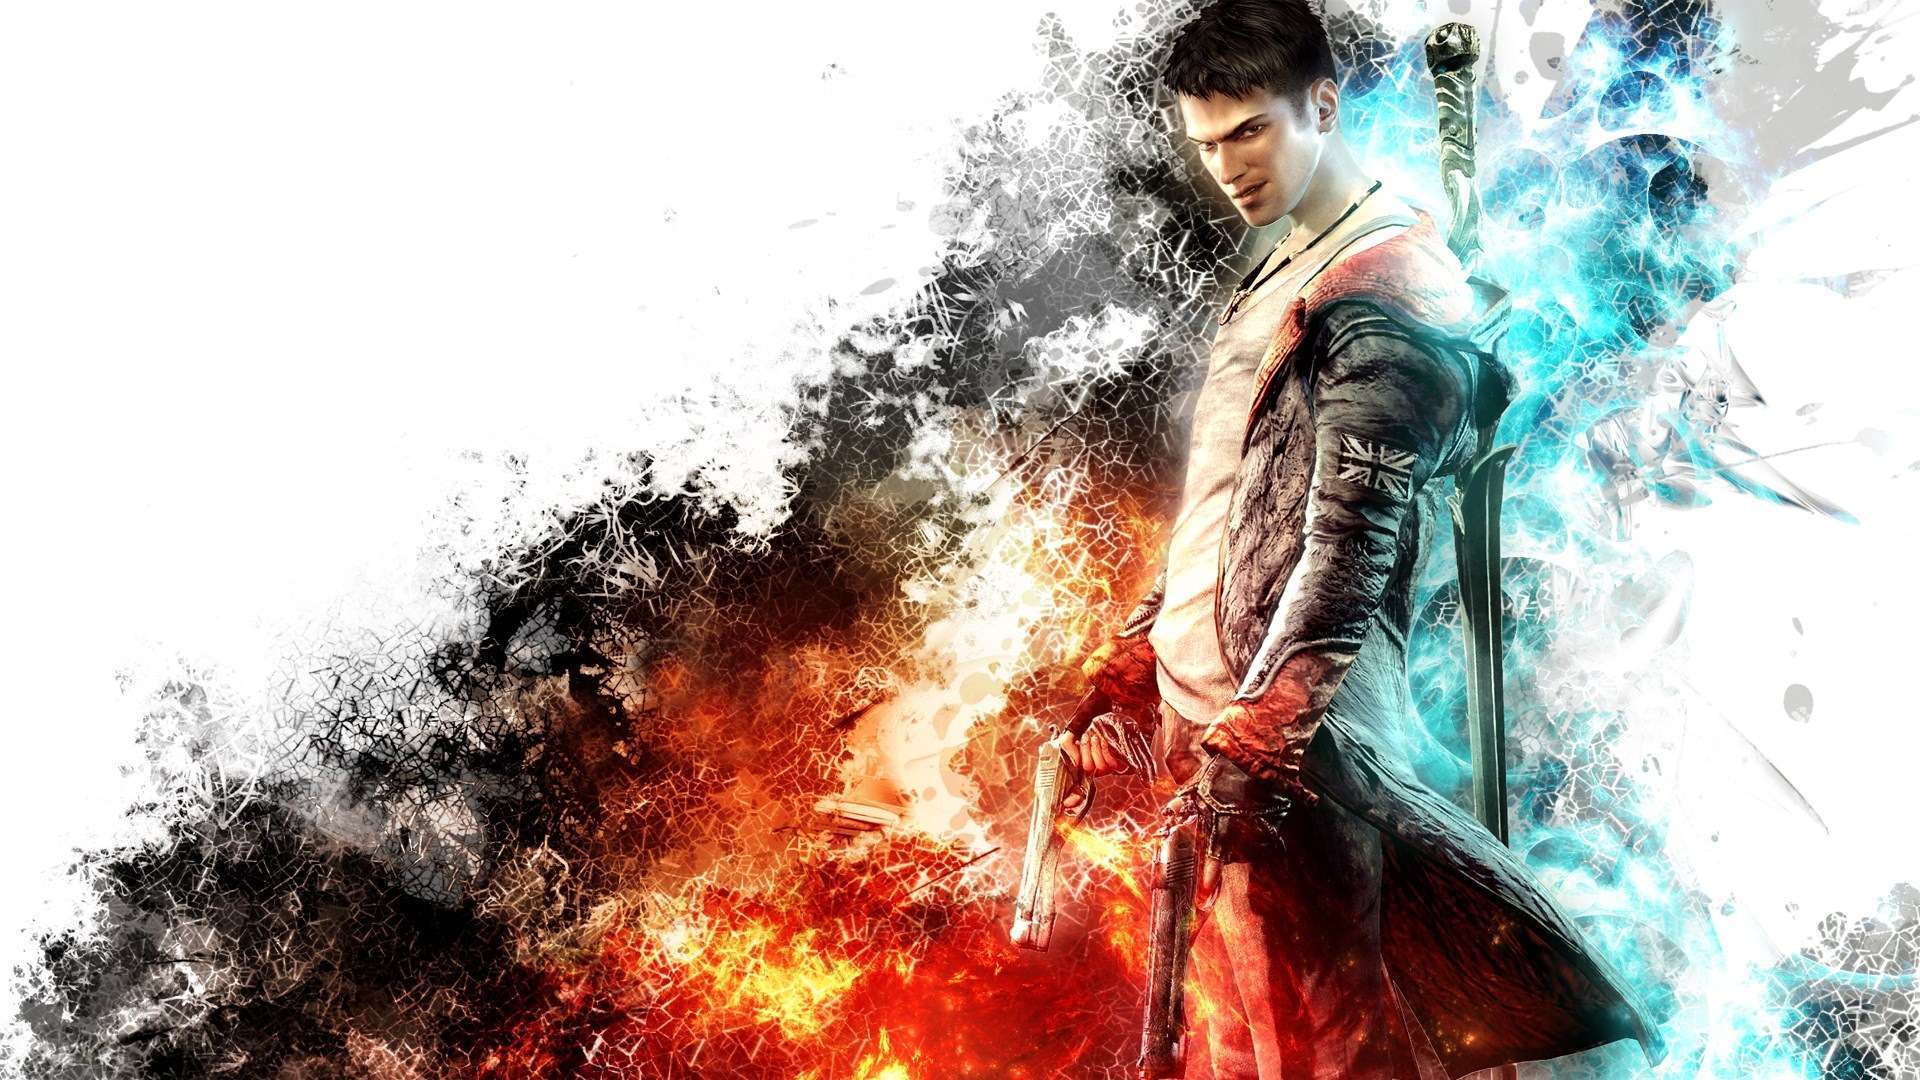 Devil May Cry 5 4K Wallpapers  Top Free Devil May Cry 5 4K Backgrounds   WallpaperAccess